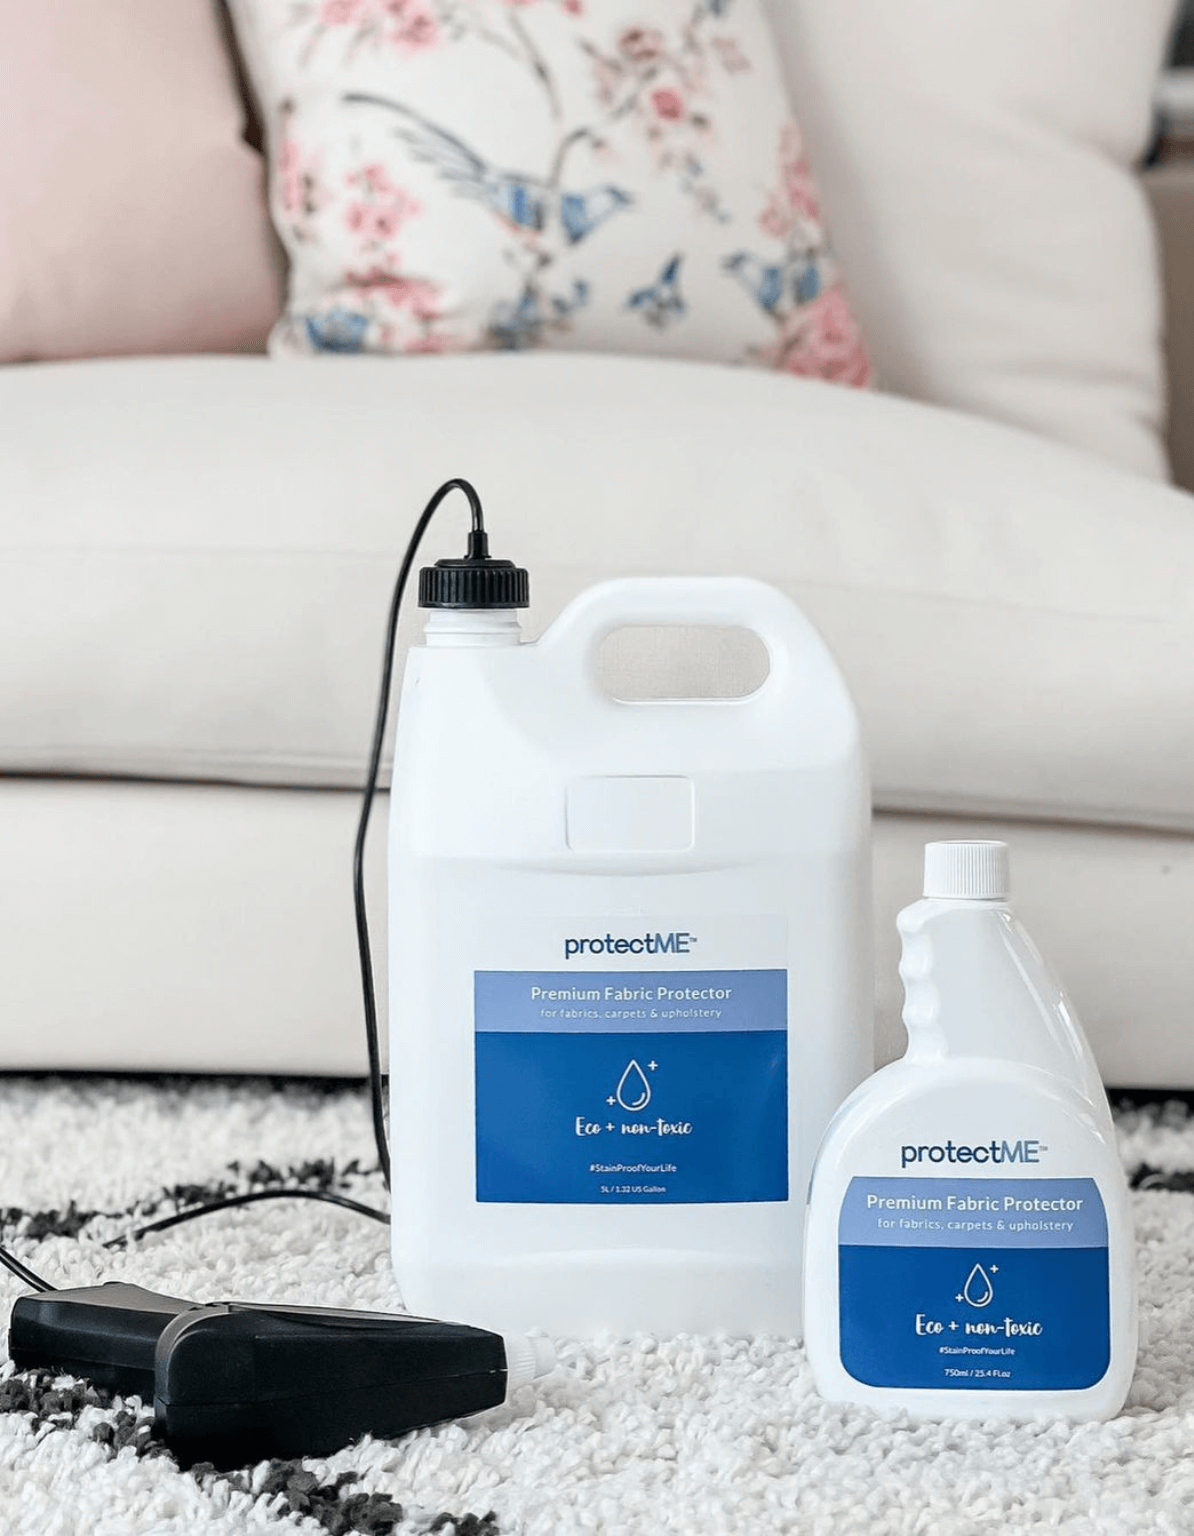 Fabric and Upholstery Protector